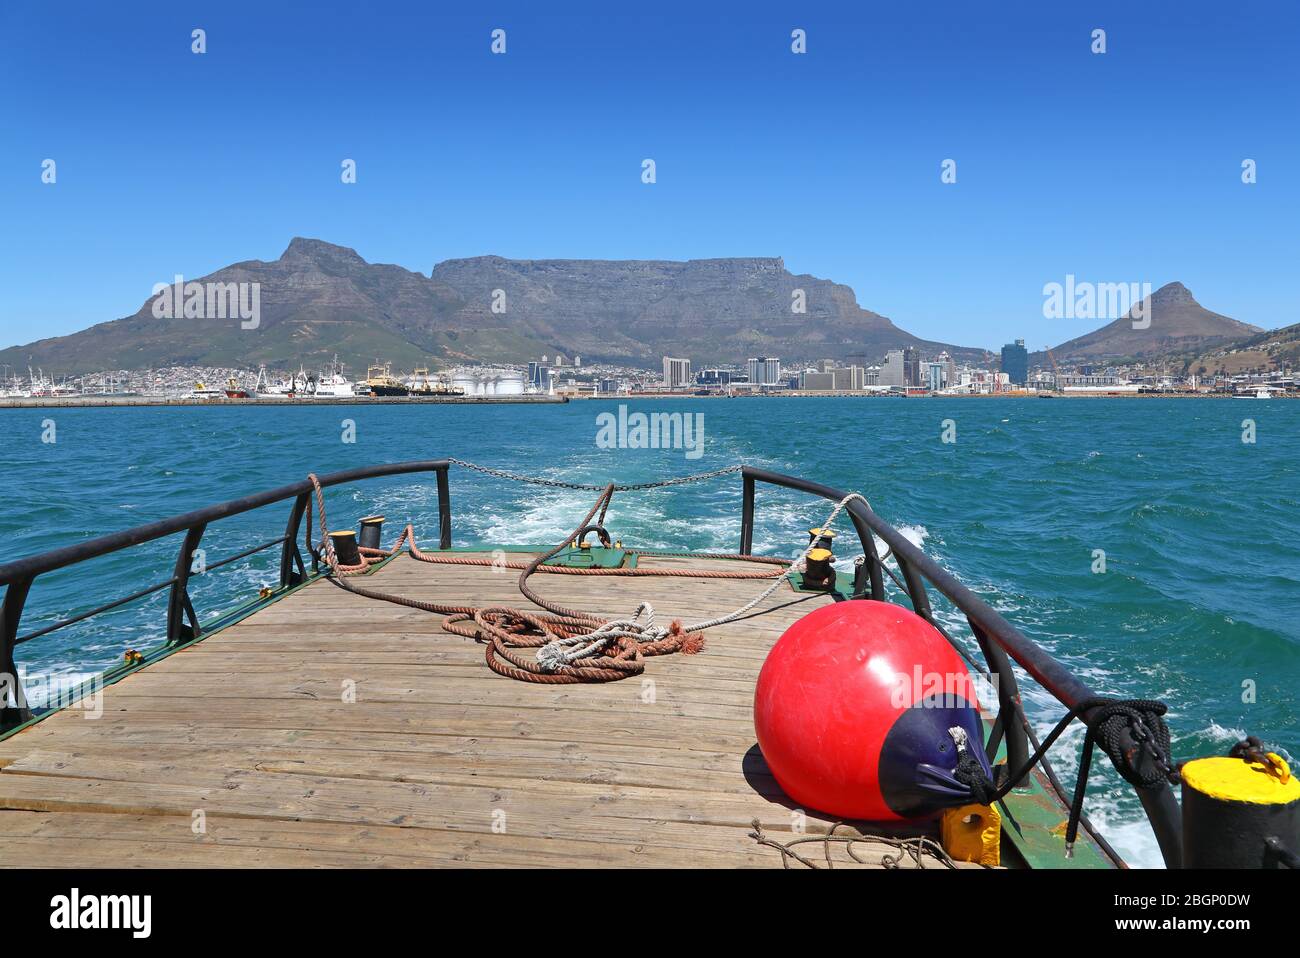 Image of a boat deck with Cape Town CBD and Table Mountain in the background Stock Photo